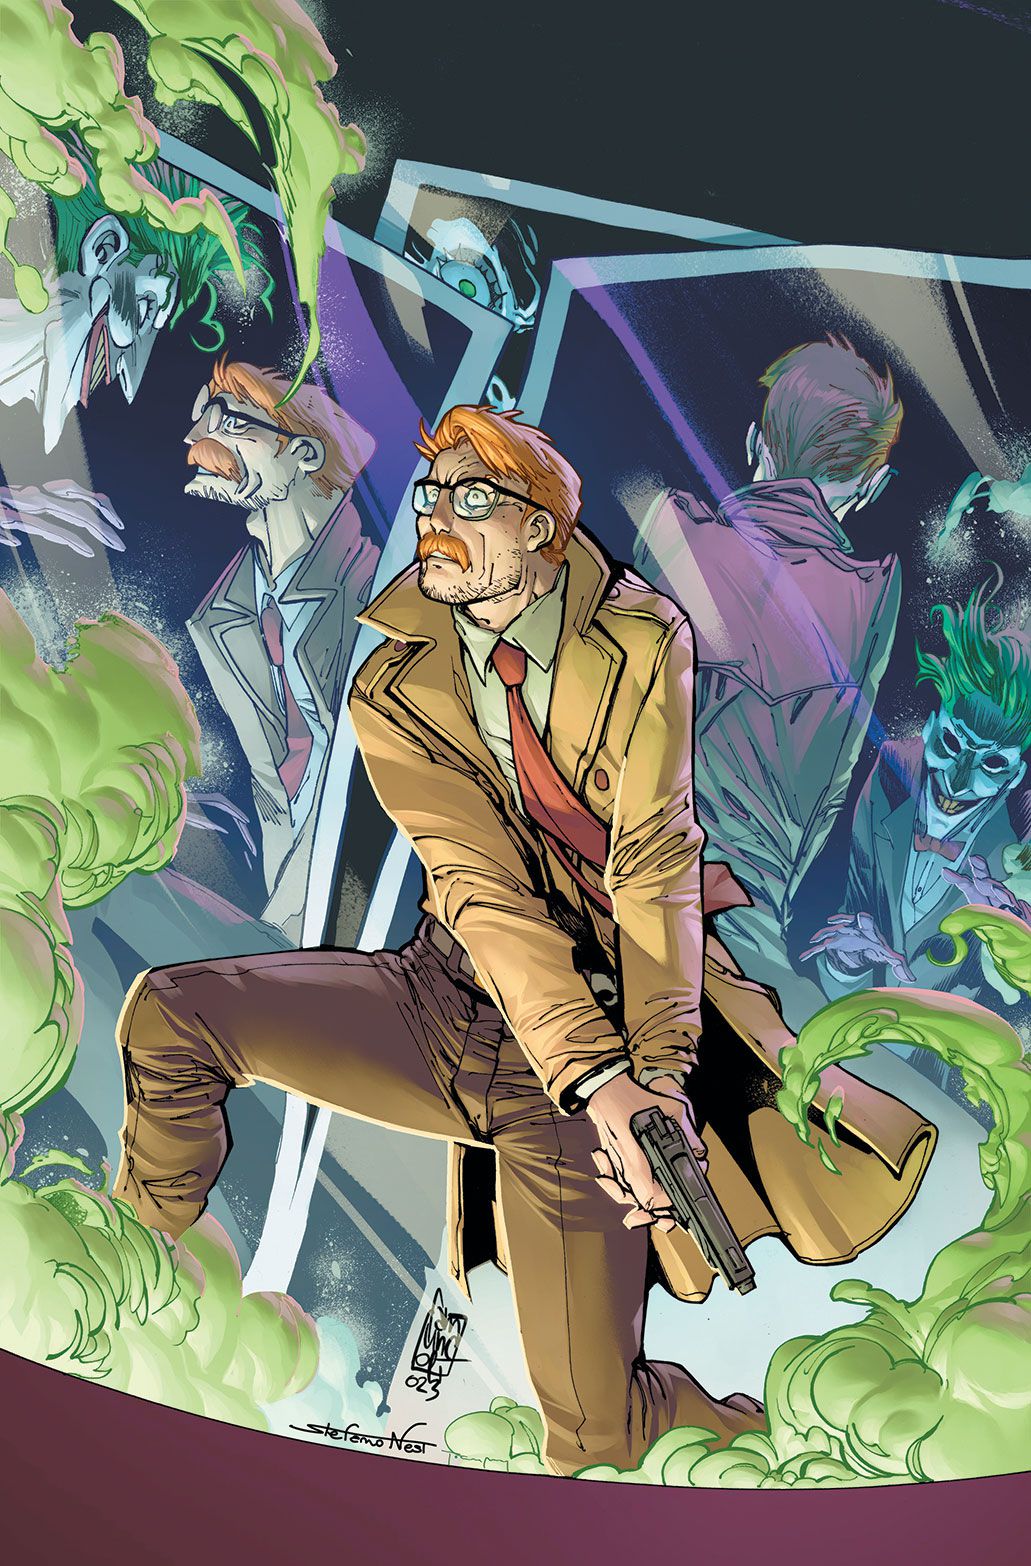 Jim Gordon faces off against the Joker in a house of mirrors — some of the mirrors reflect two Jokers instead of Jim and the Joker. Gordon has a pistol gripped in both hands. 